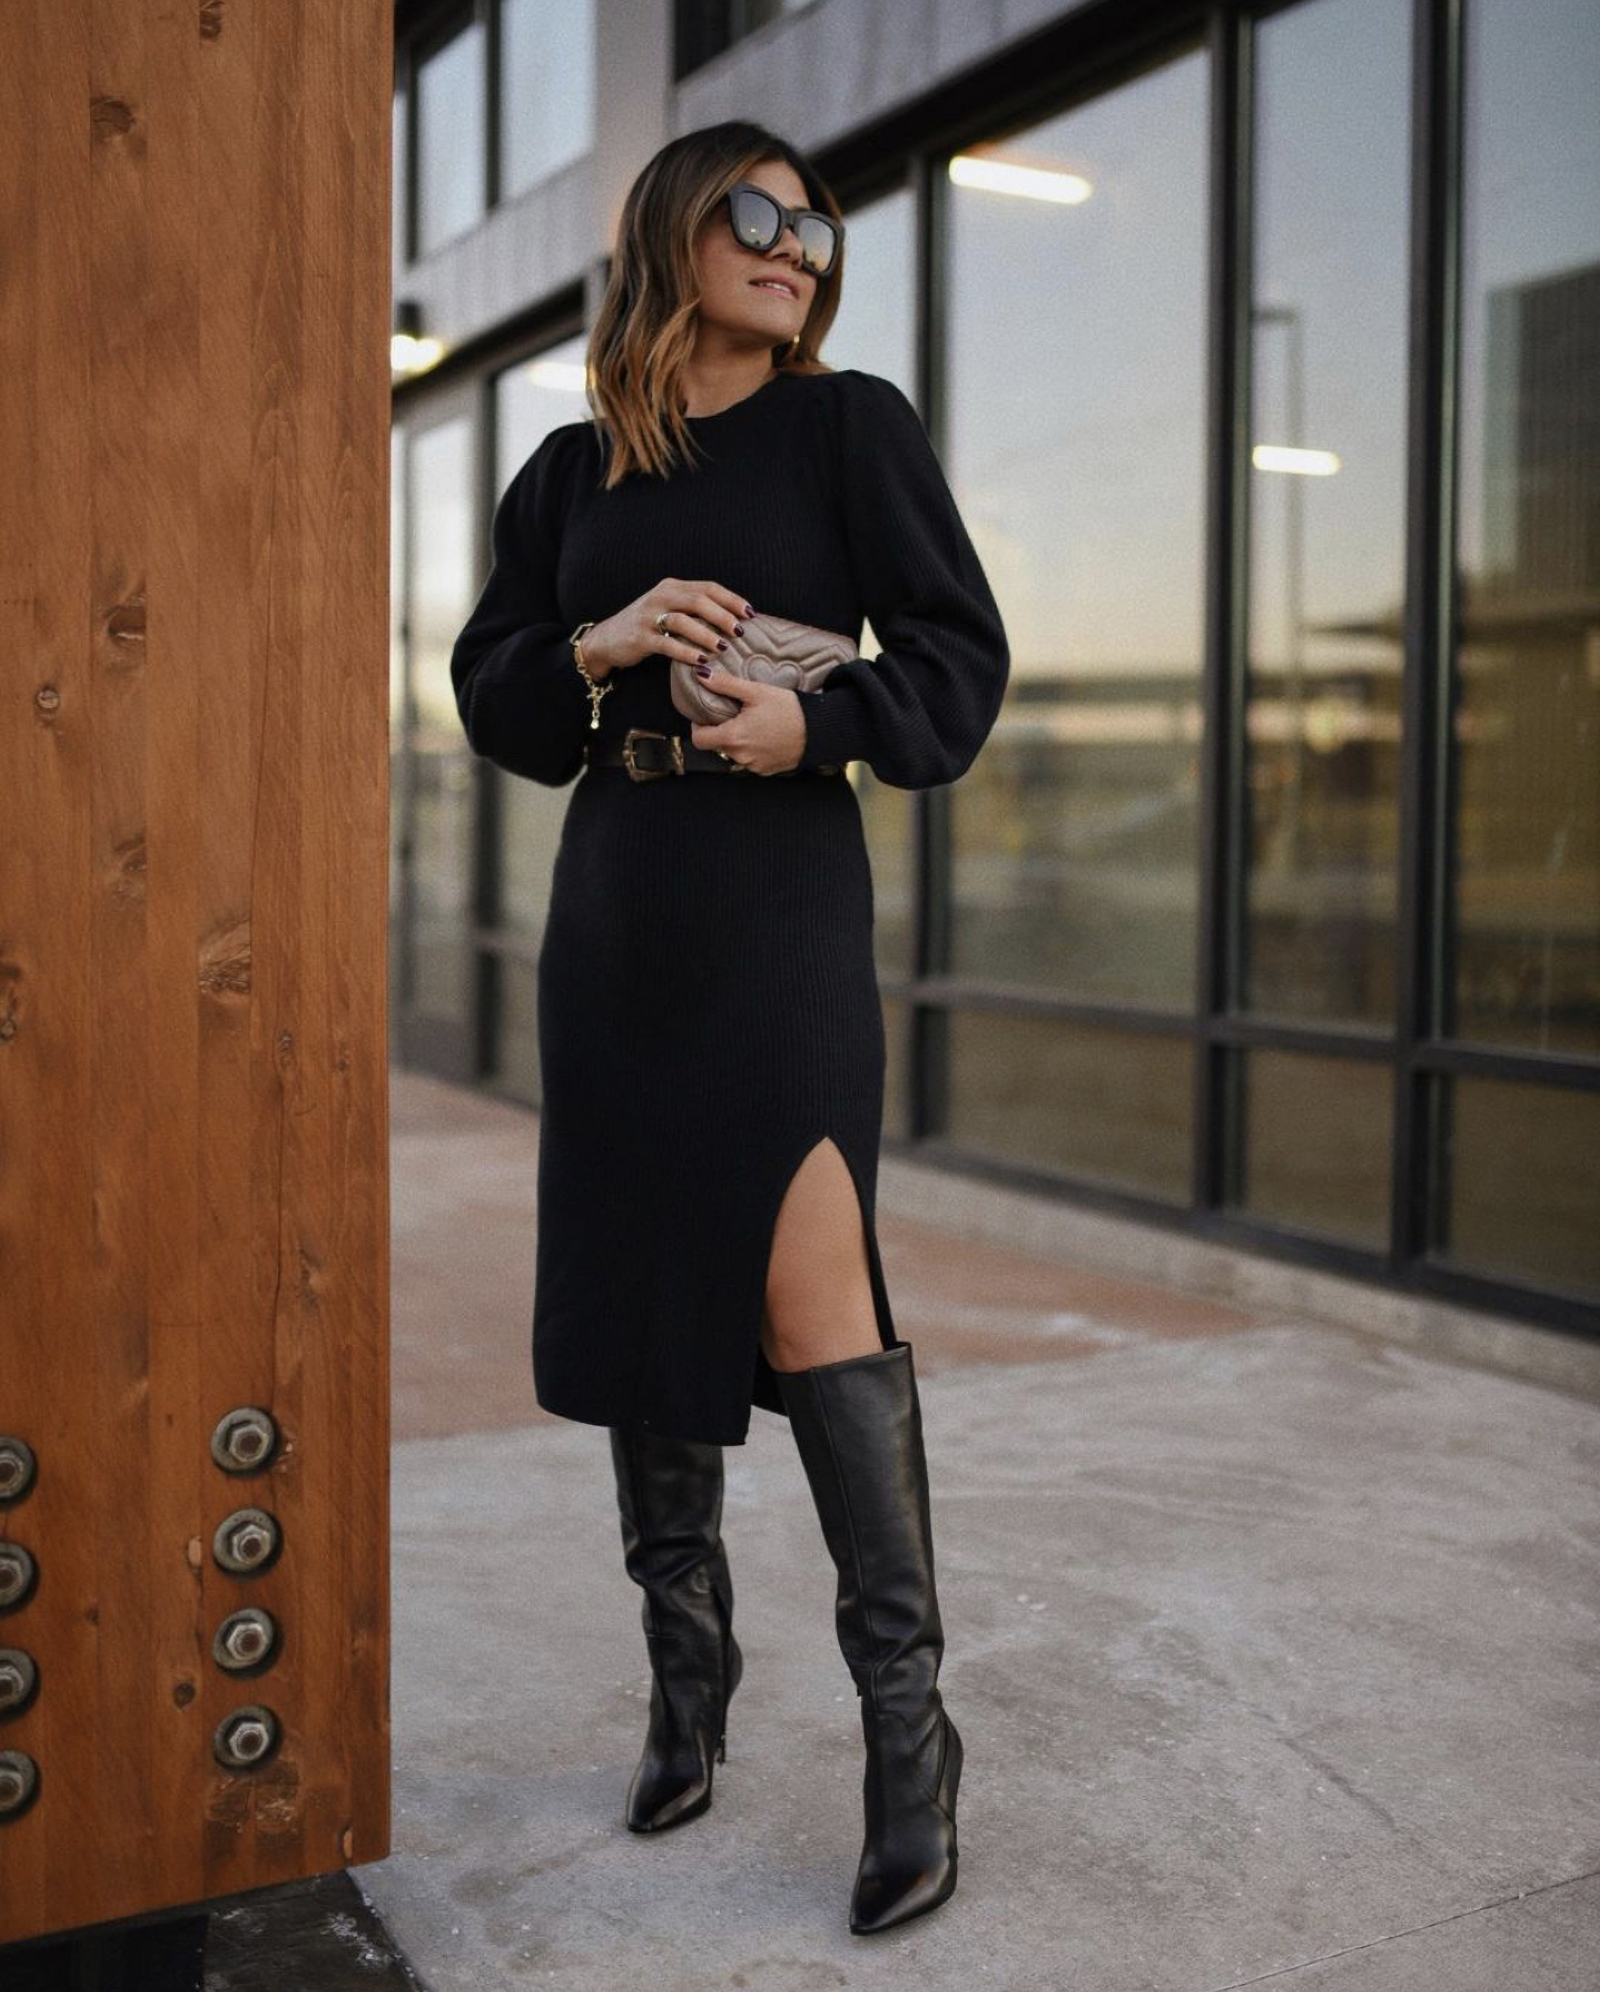 CAROLINA HELLAL FROM CHIC TALK WEARING A KNITTED BLACK DRESS WITH SLOUCHY BOOTS